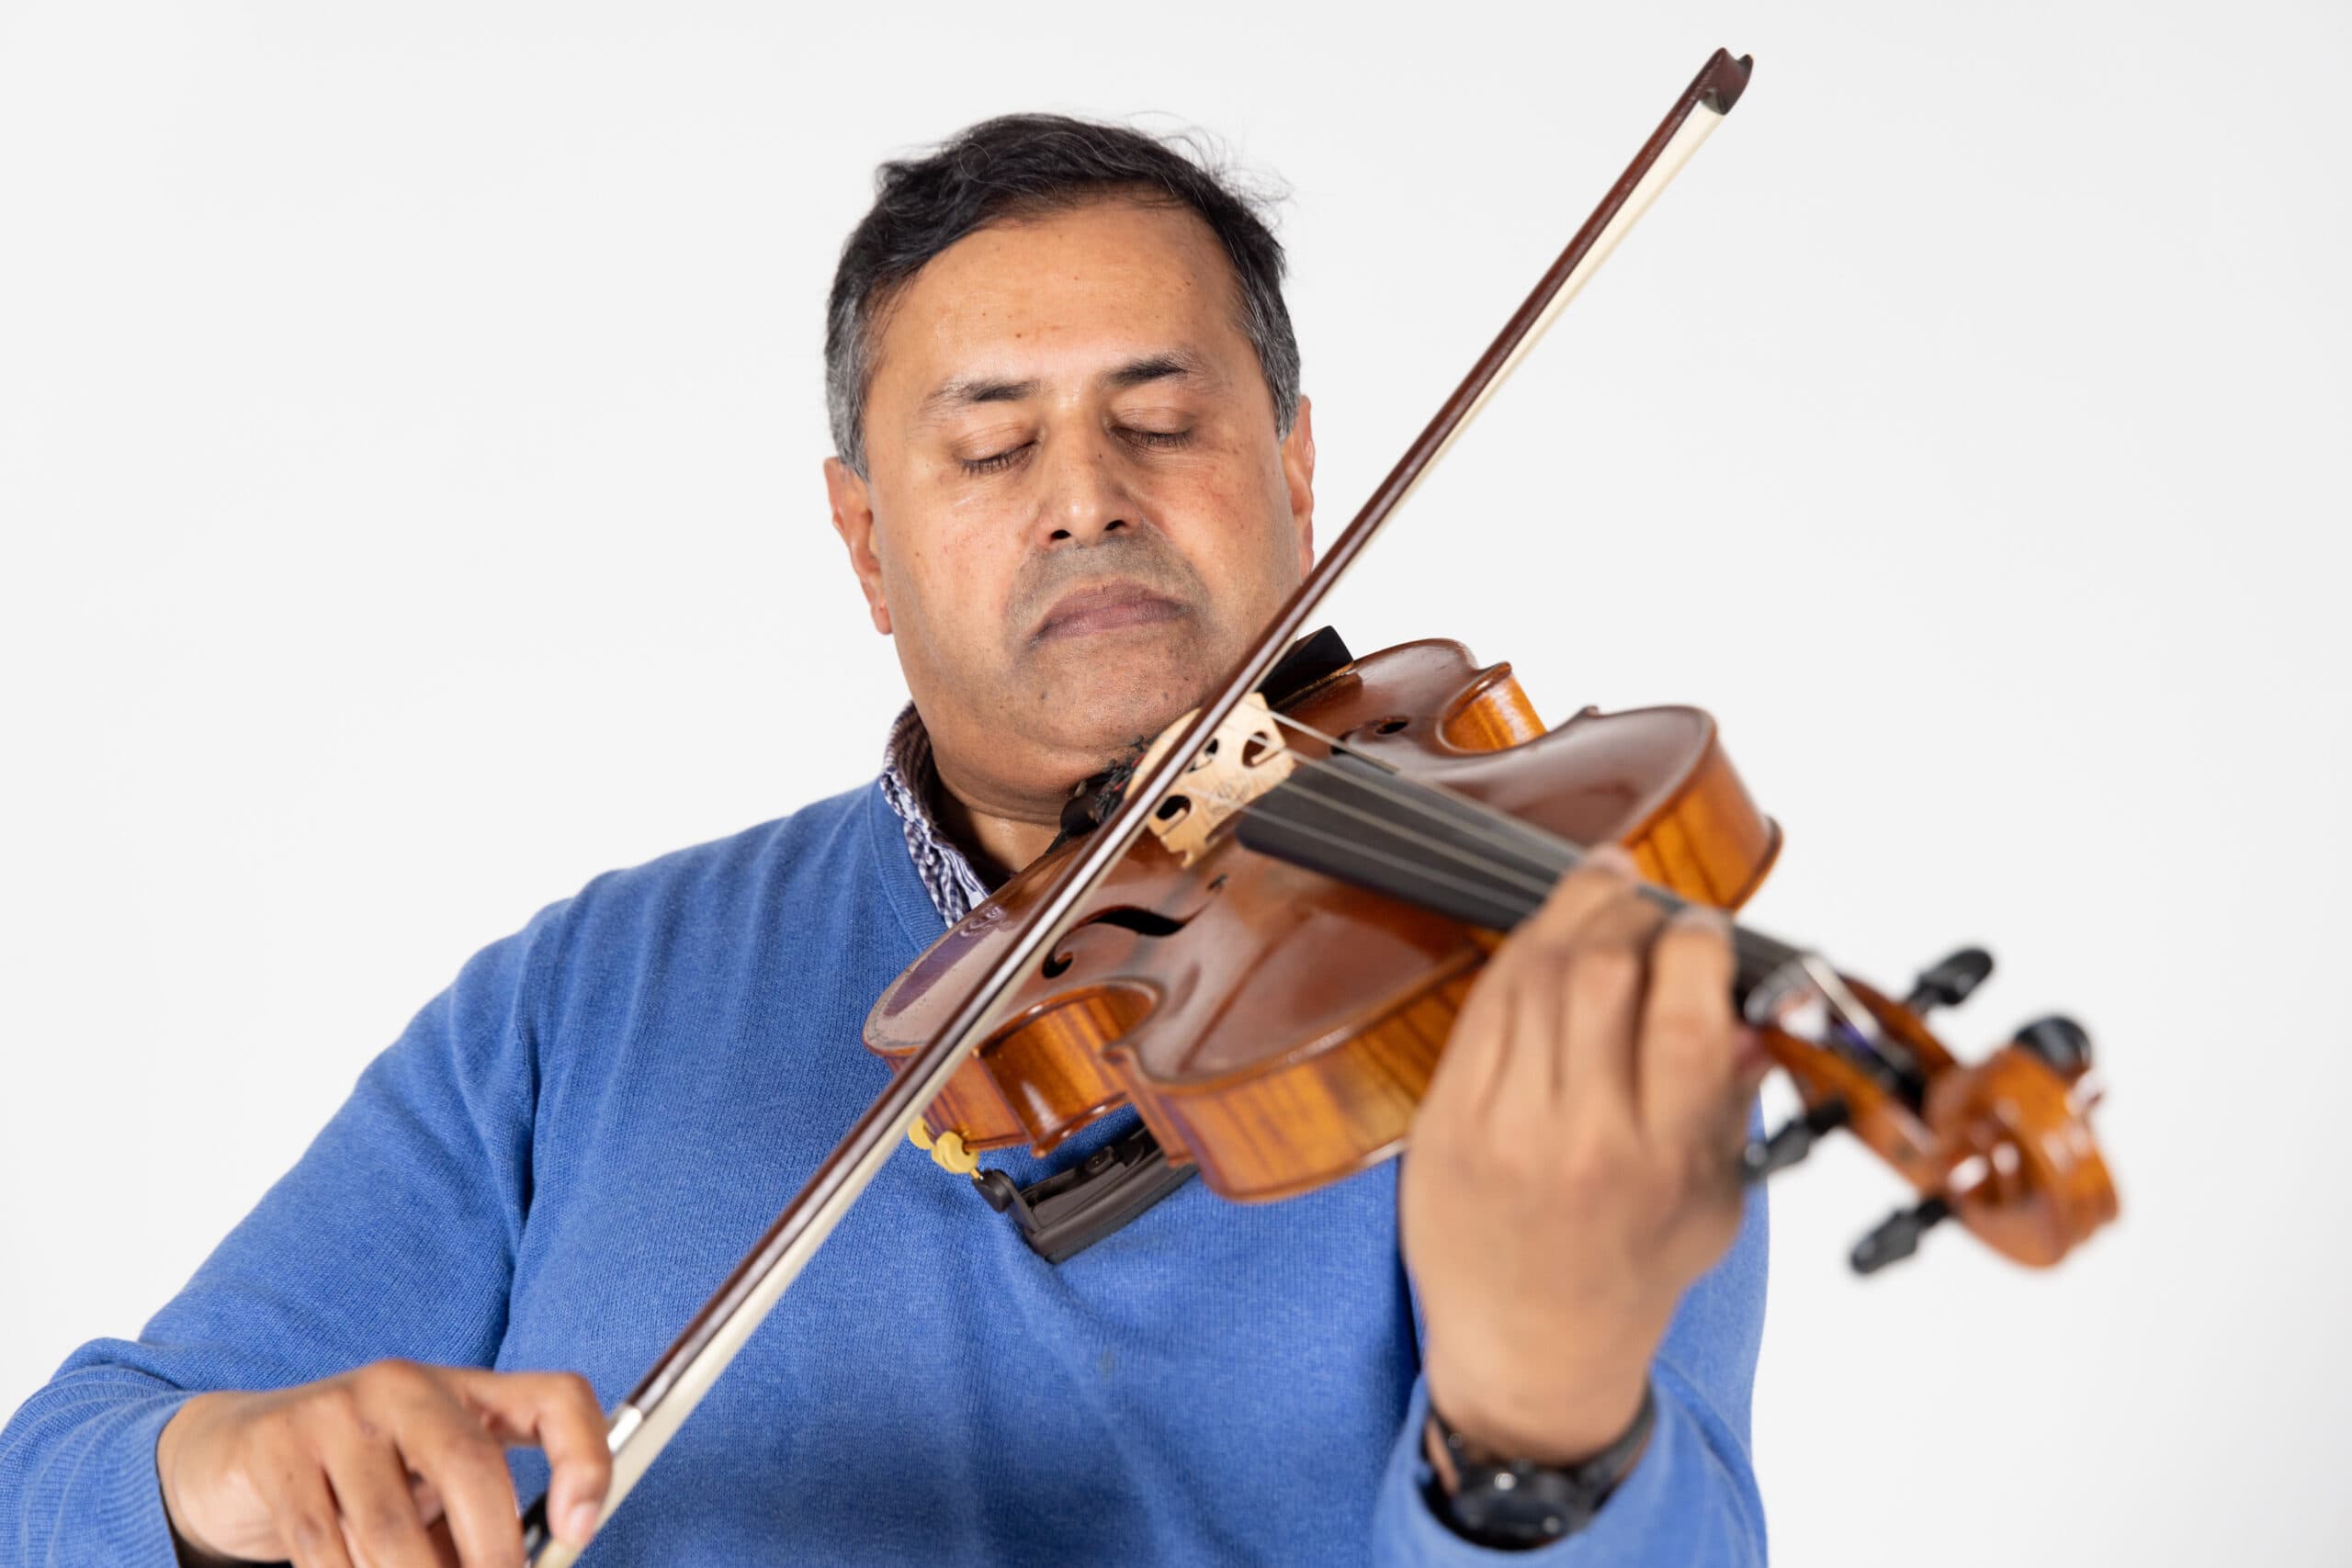 Client David is playing the violin, he has his eyes closed as he plays